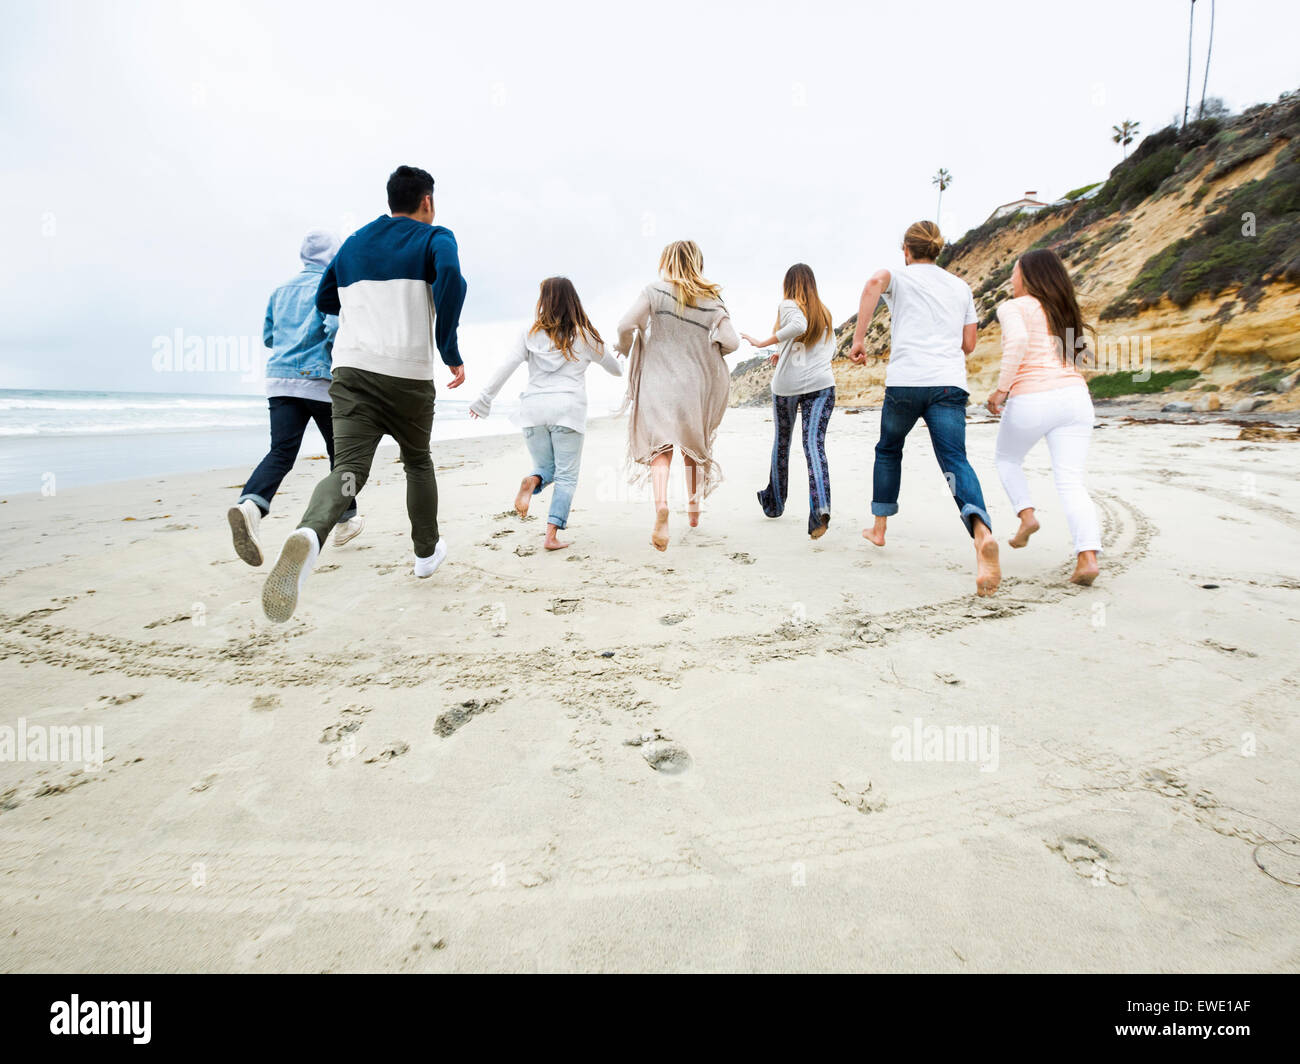 A group of young men and women running on a beach, having fun Stock Photo